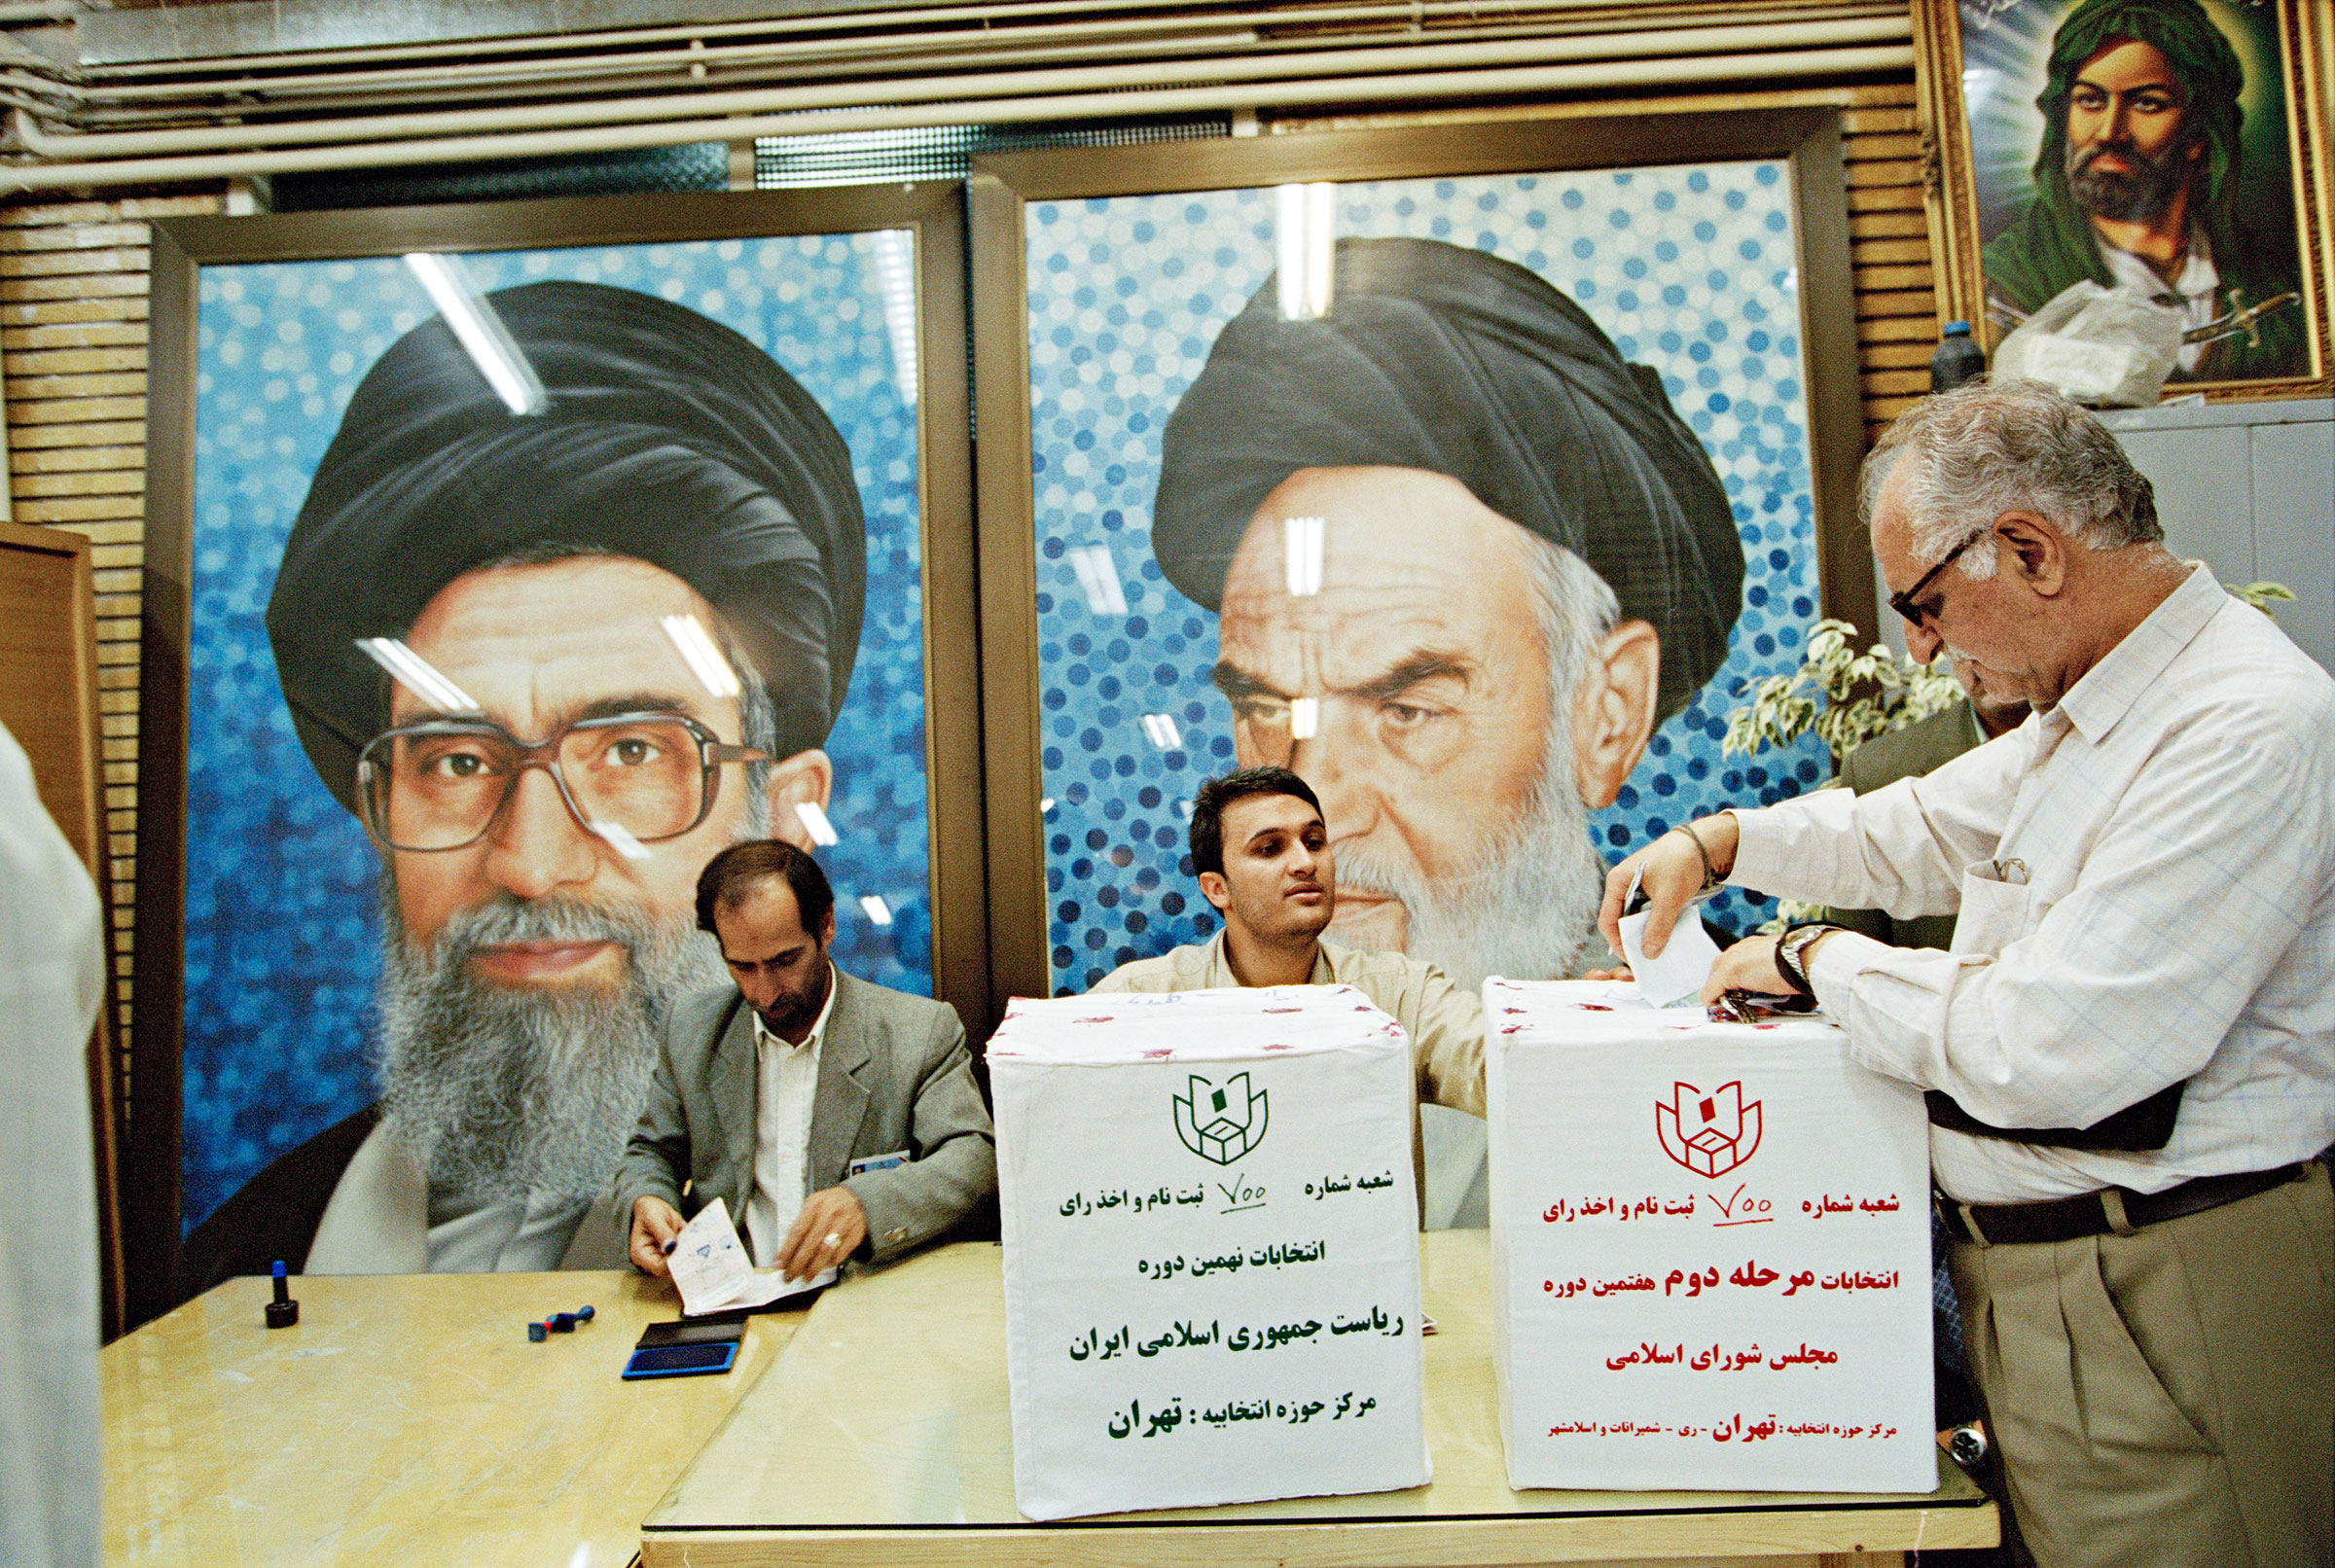 Portraits of Khamenei and his mentor and predecessor, Khomeini (right), at a Tehran polling place in June